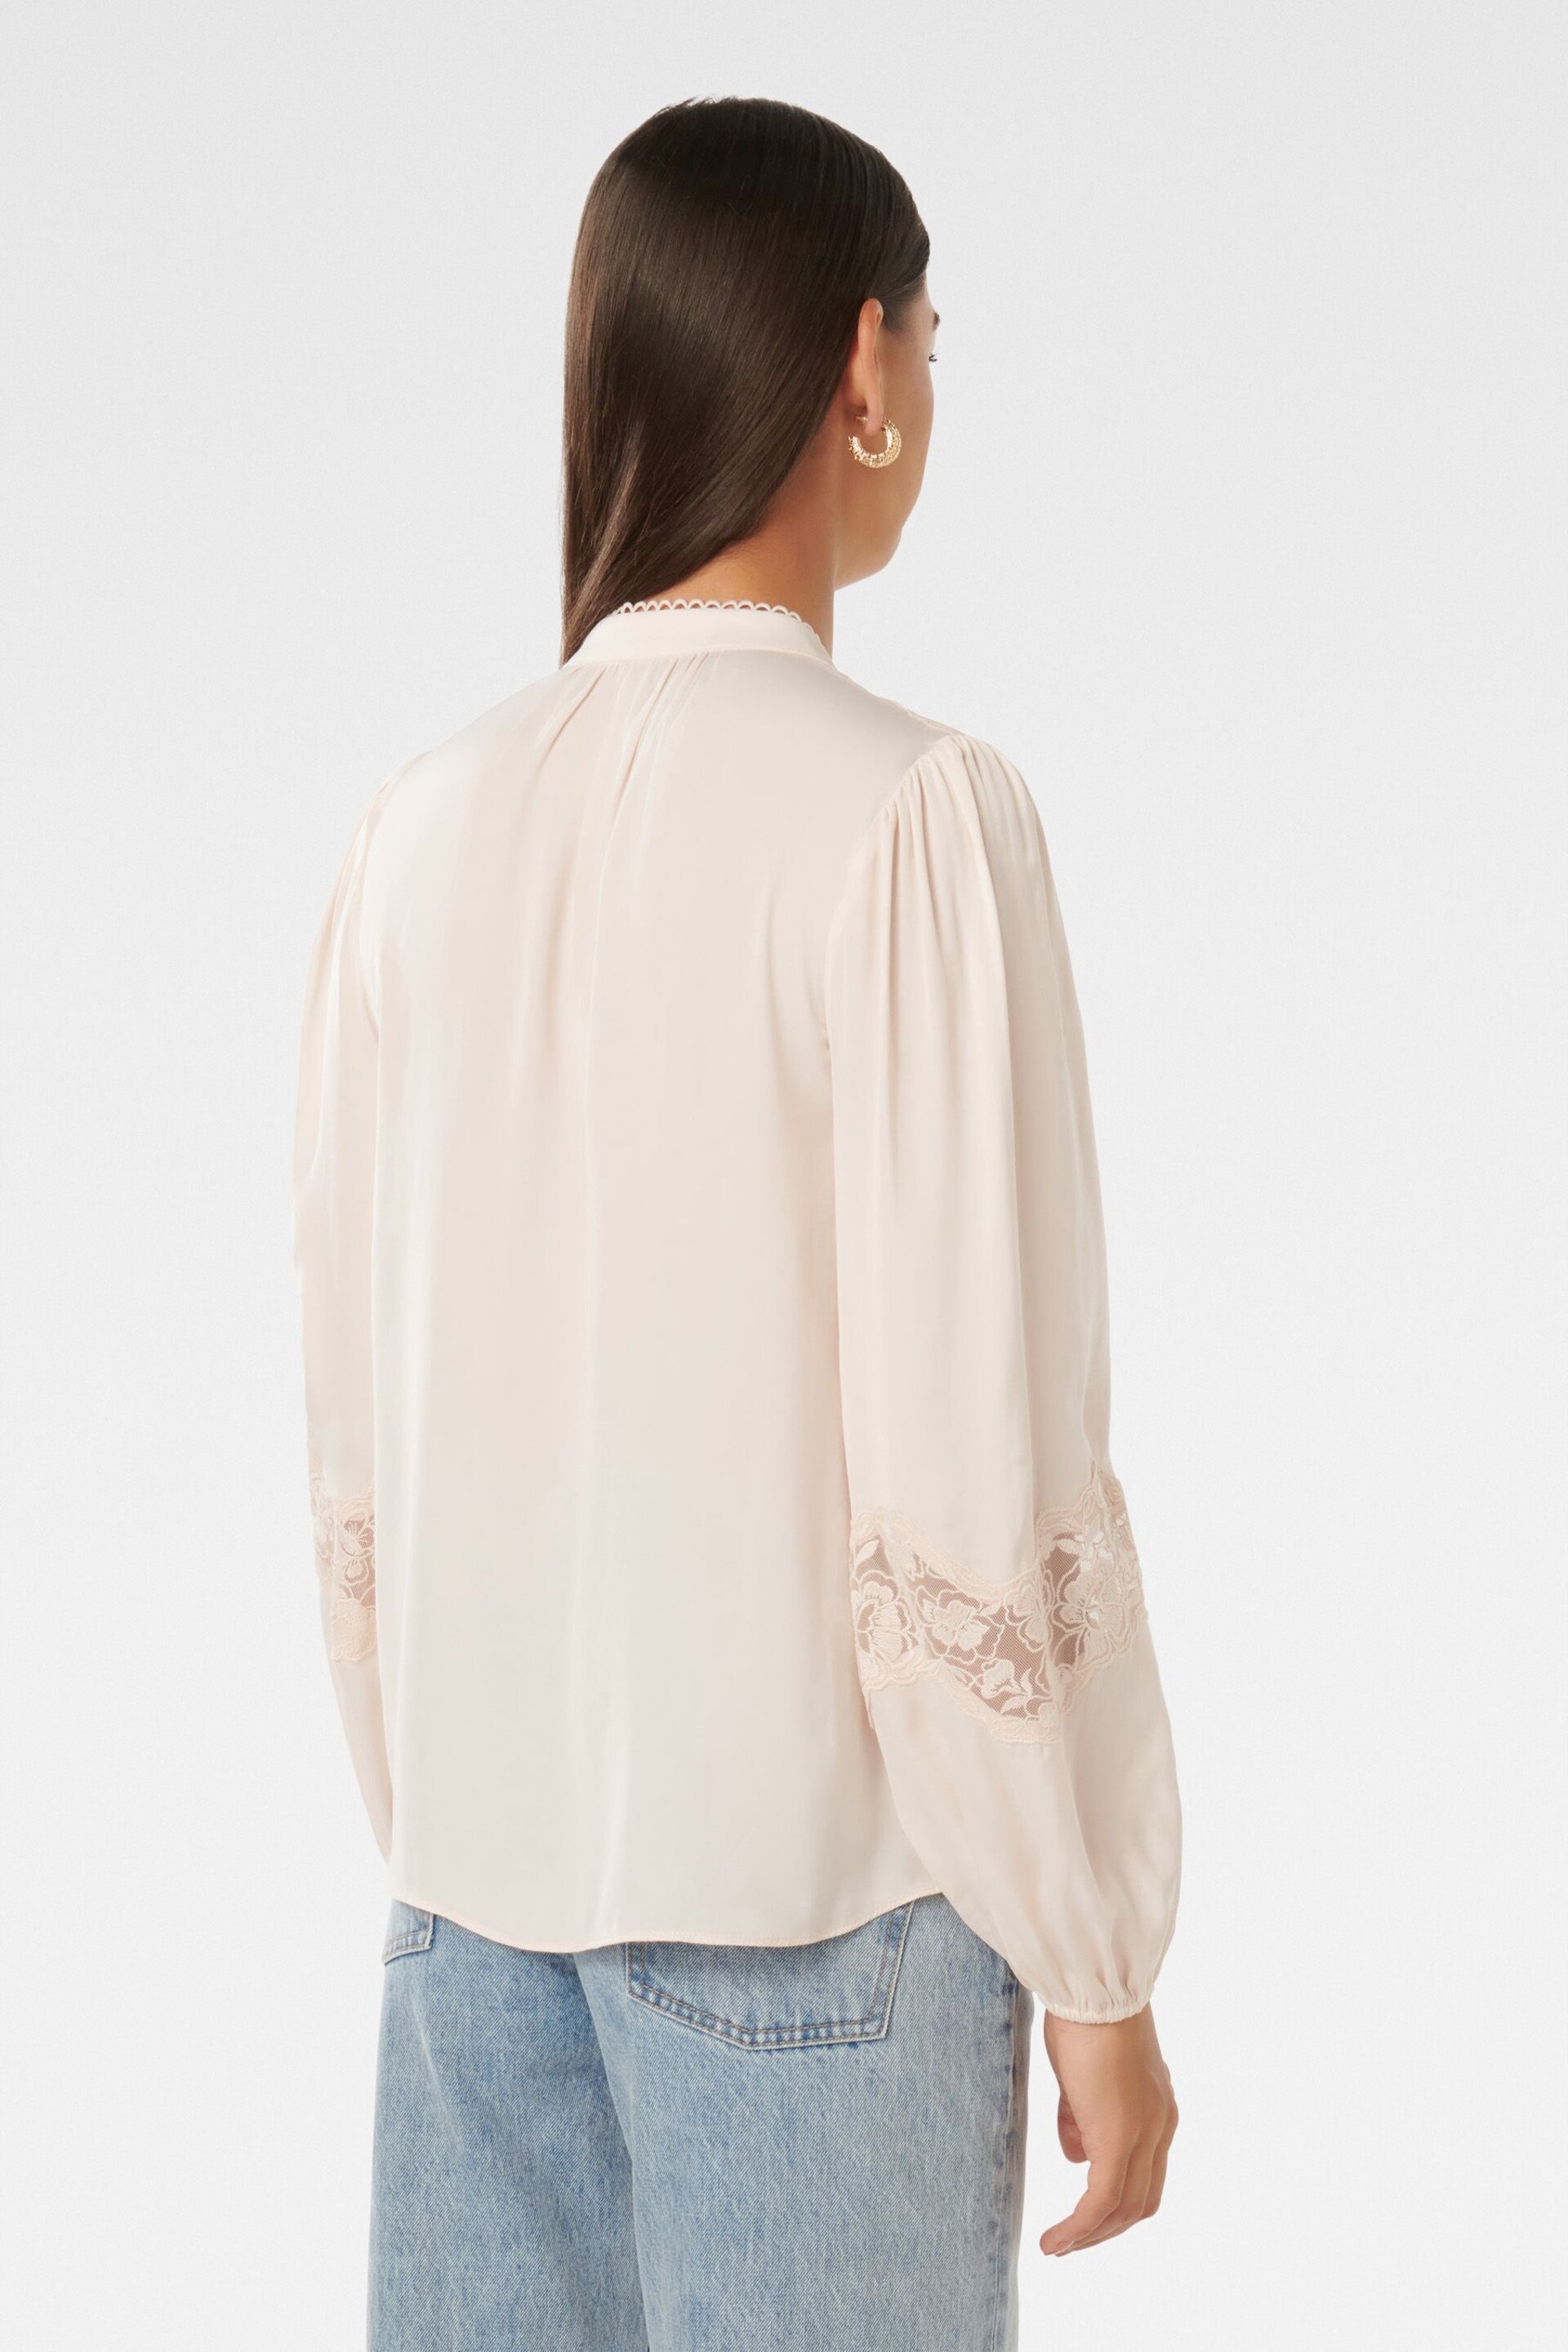 Forever New Cream Annalise Lace Sleeves Blouse - Image 4 of 5